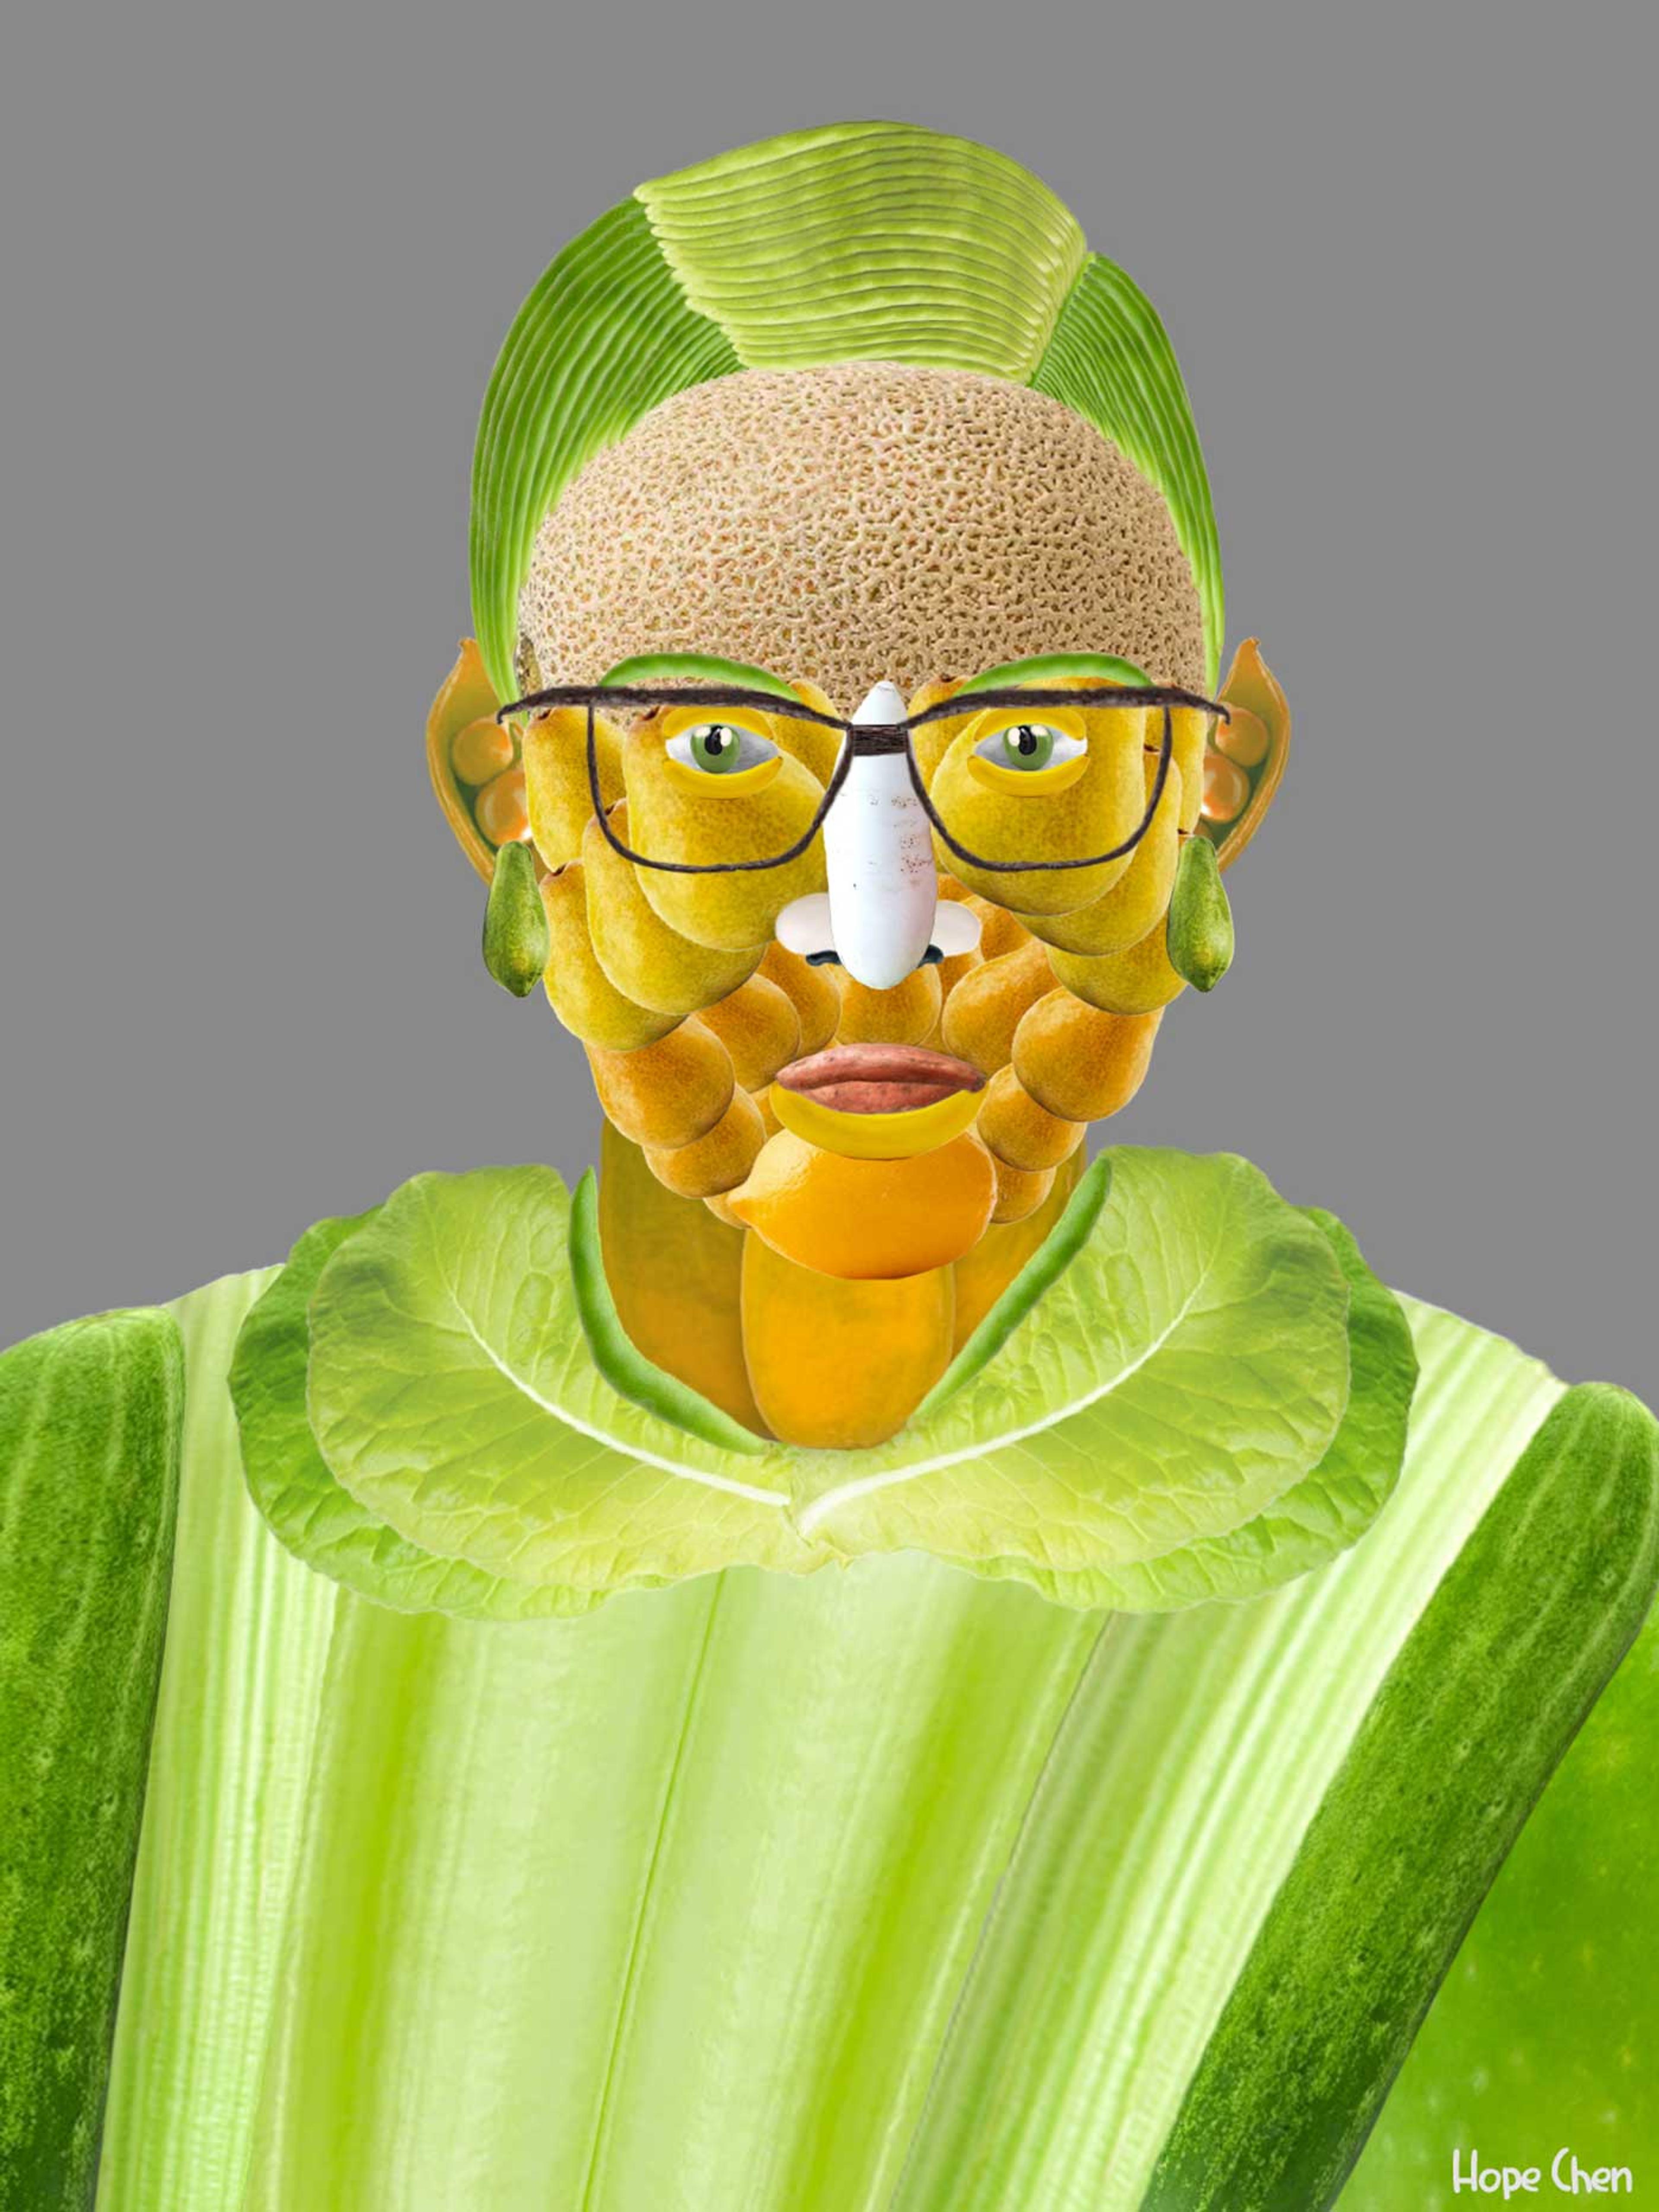 Digital collage of fruits and vegetables put together to form the face of Ruth Bader Ginsburg.